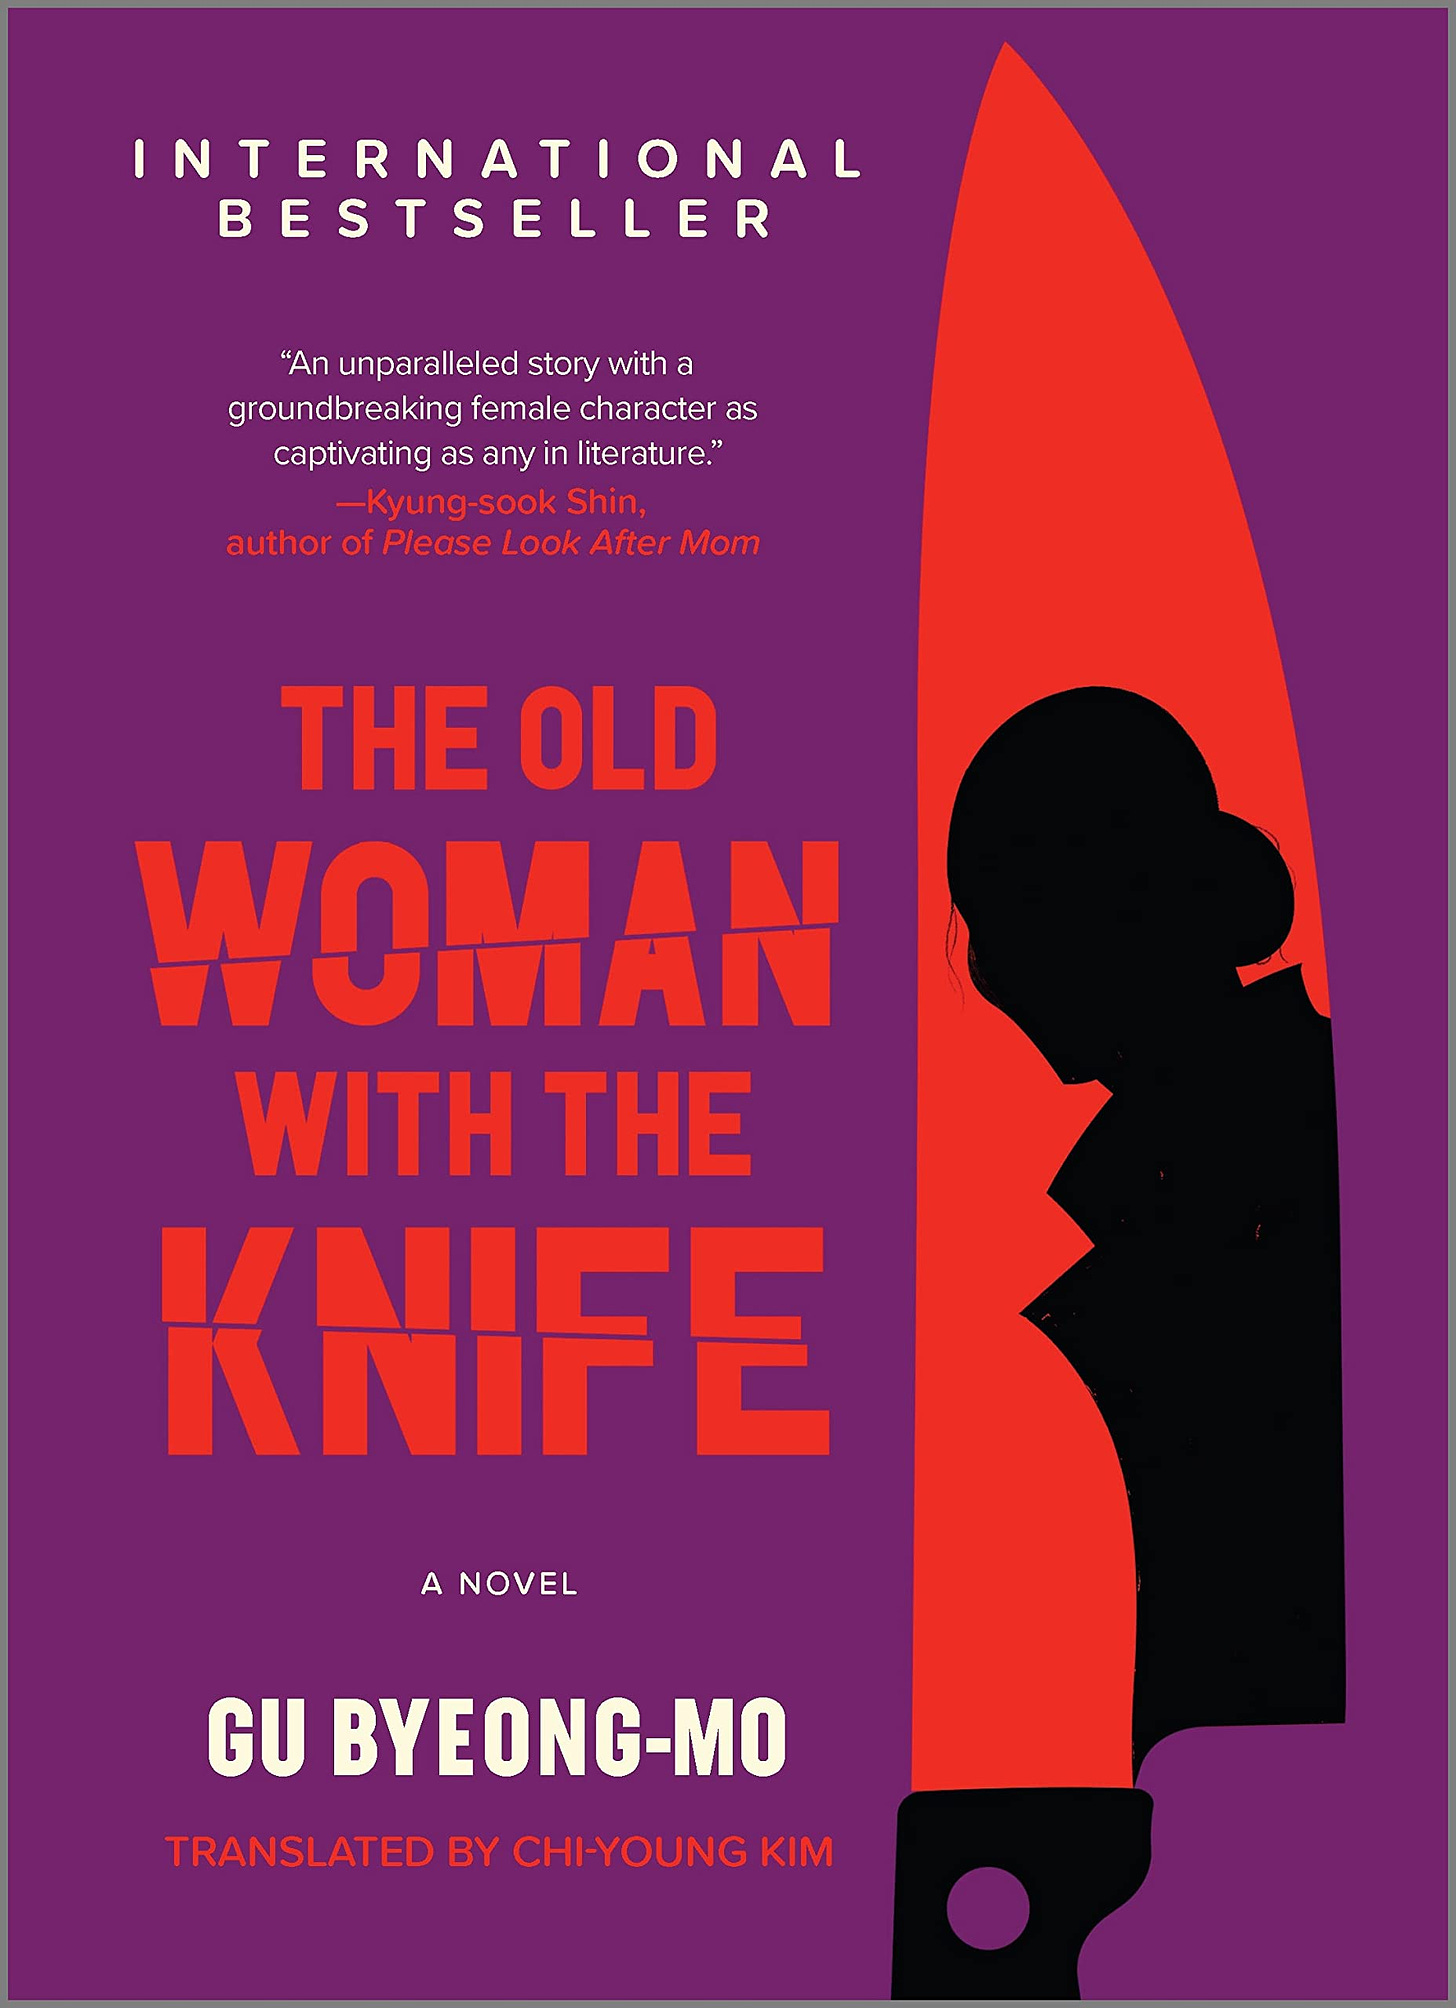 Amazon.com: The Old Woman with the Knife: A Novel: 9781335425768:  Byeong-mo, Gu: Books